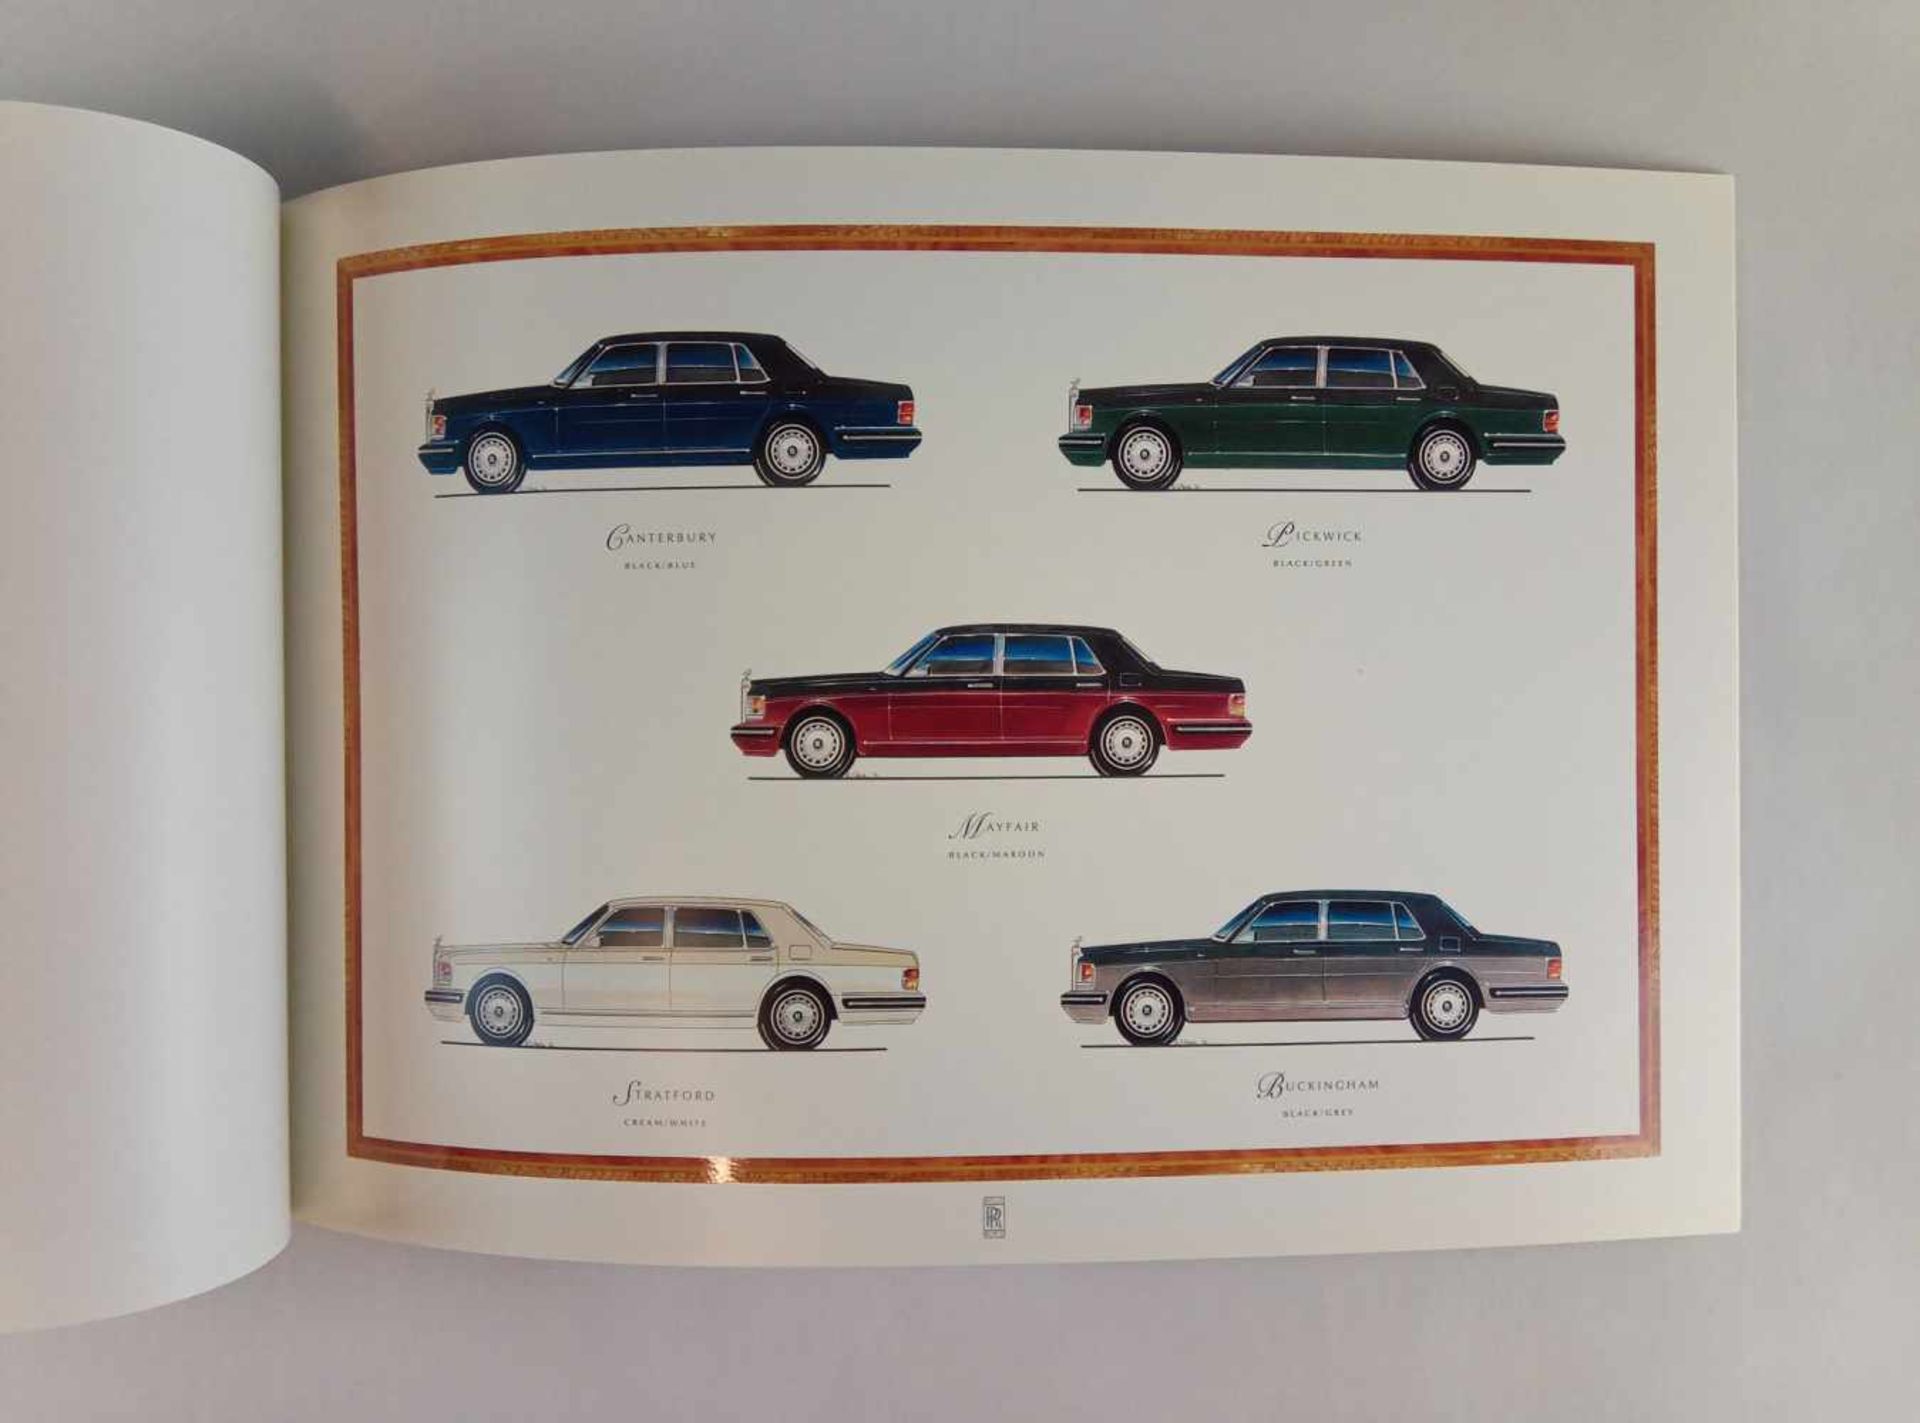 Rolls-Royce "Silver Spur" 75th Anniversary brochure - Image 2 of 3